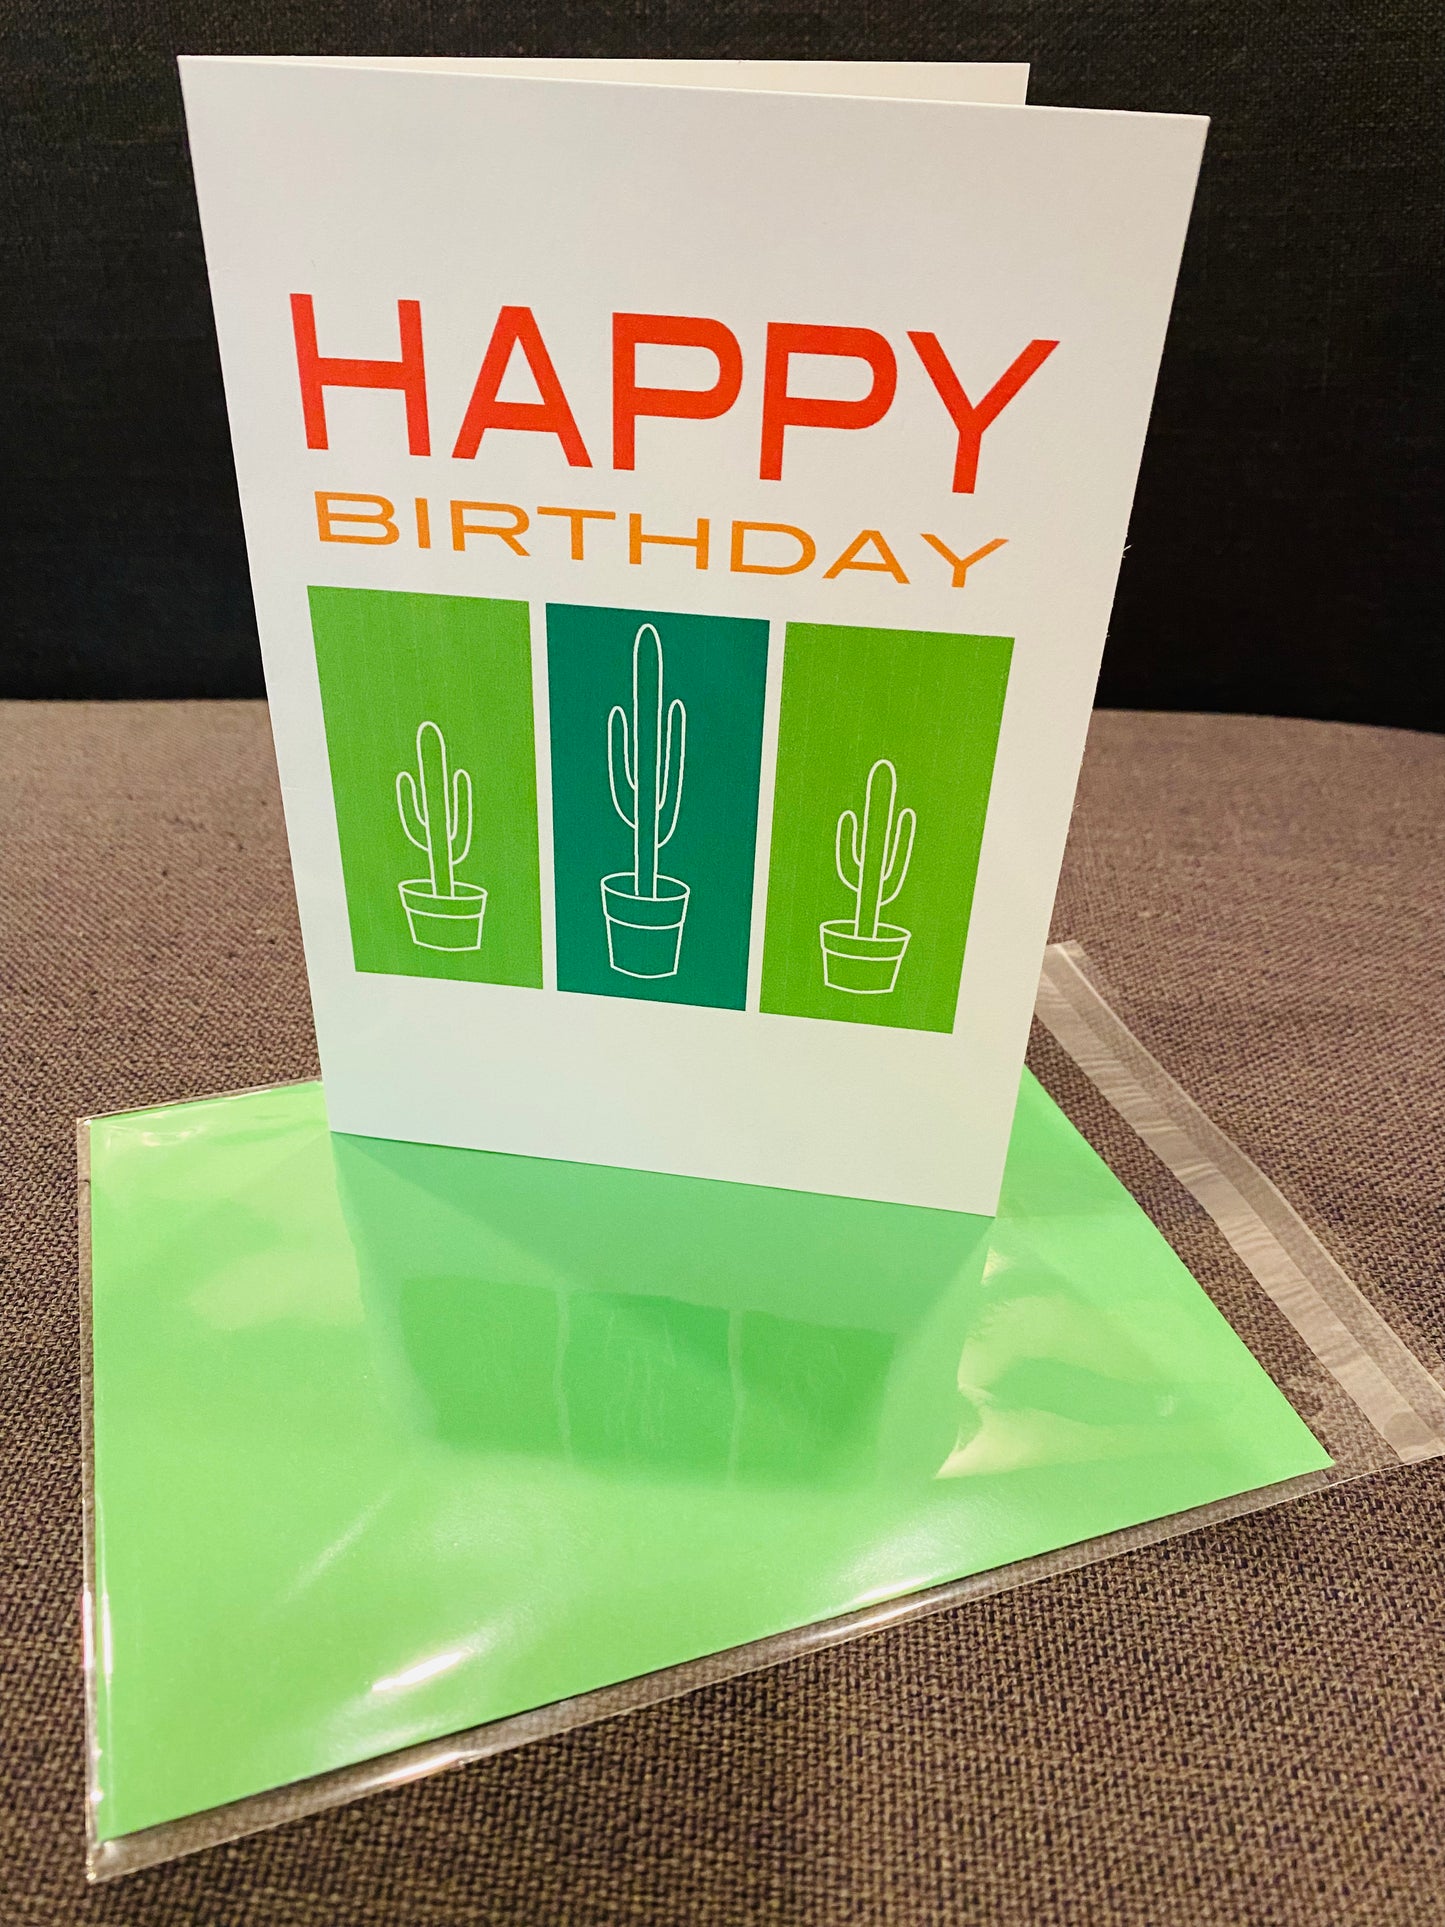 HAPPY BIRTHDAY CACTUS greeting card 5x7 for those cactus lovers!